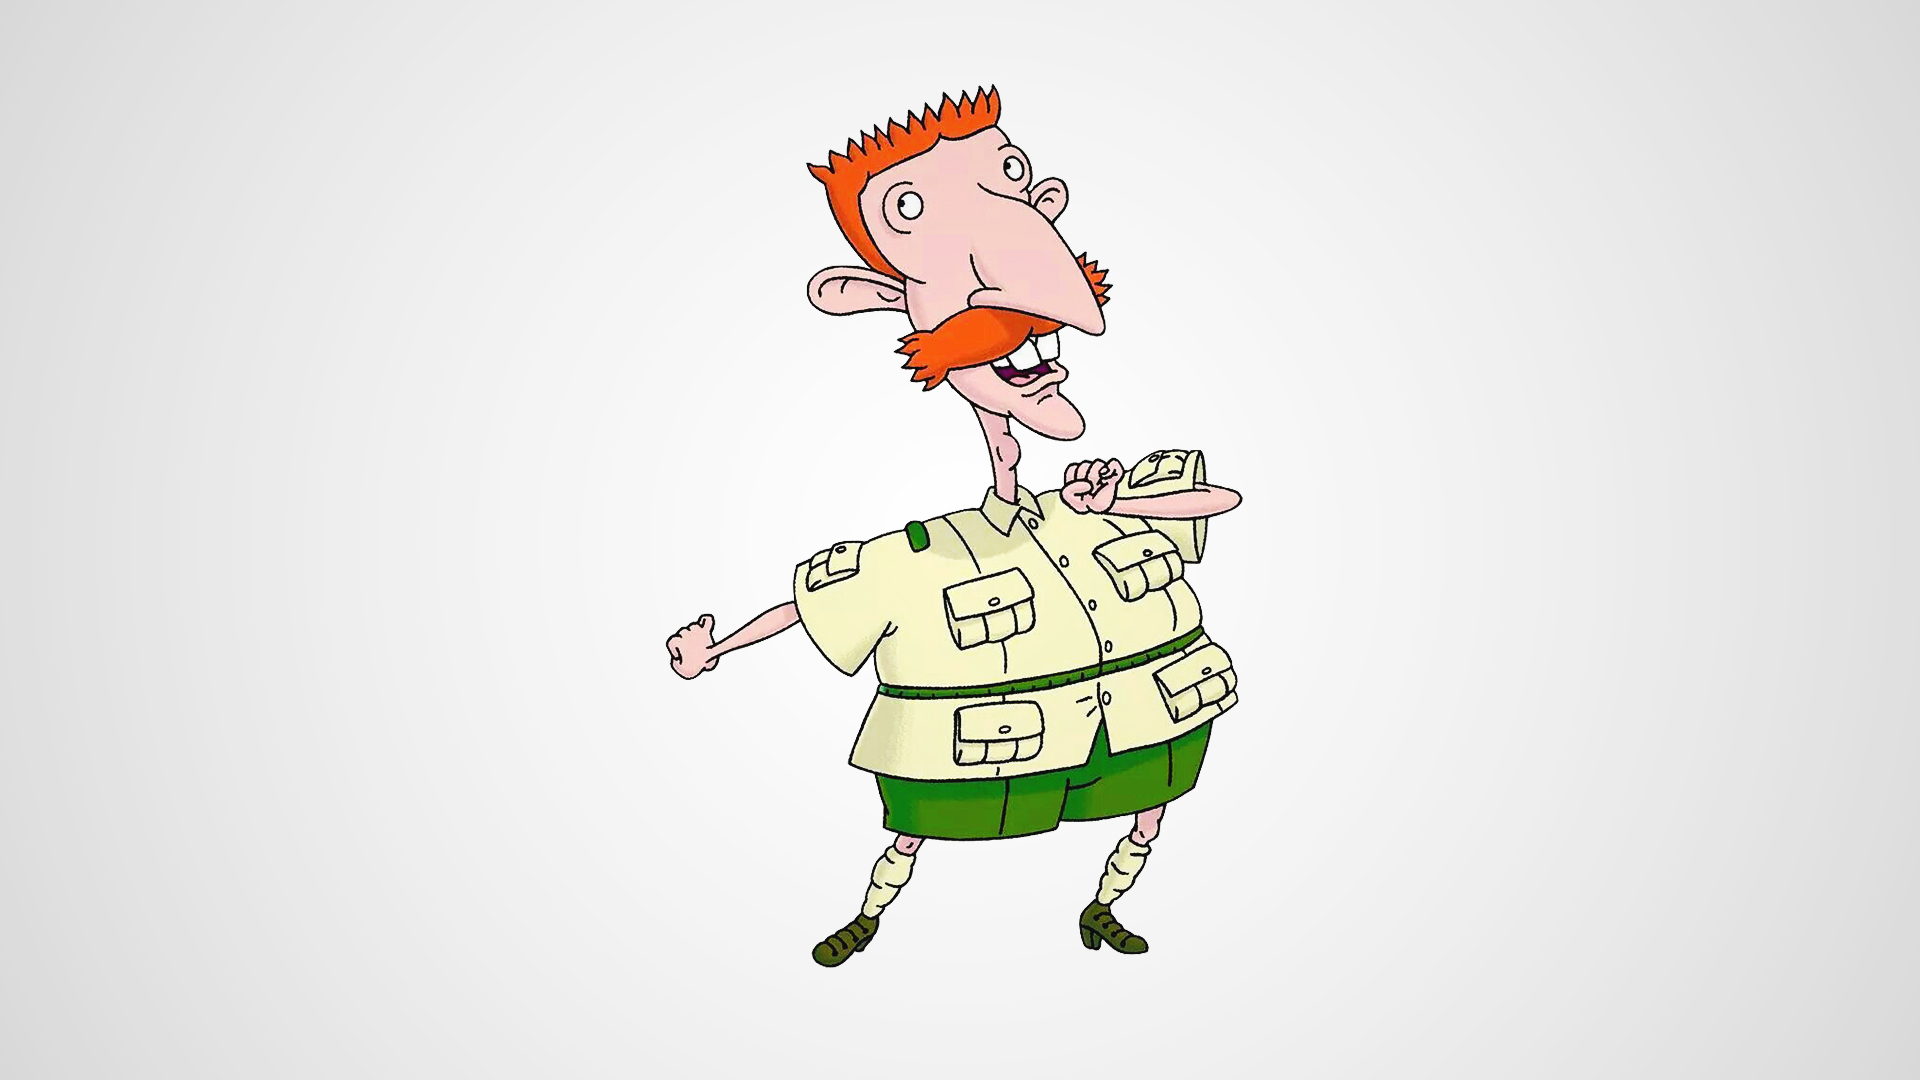 Nigel Thornberry is the cartoon with big nose, red hair and red mustache.